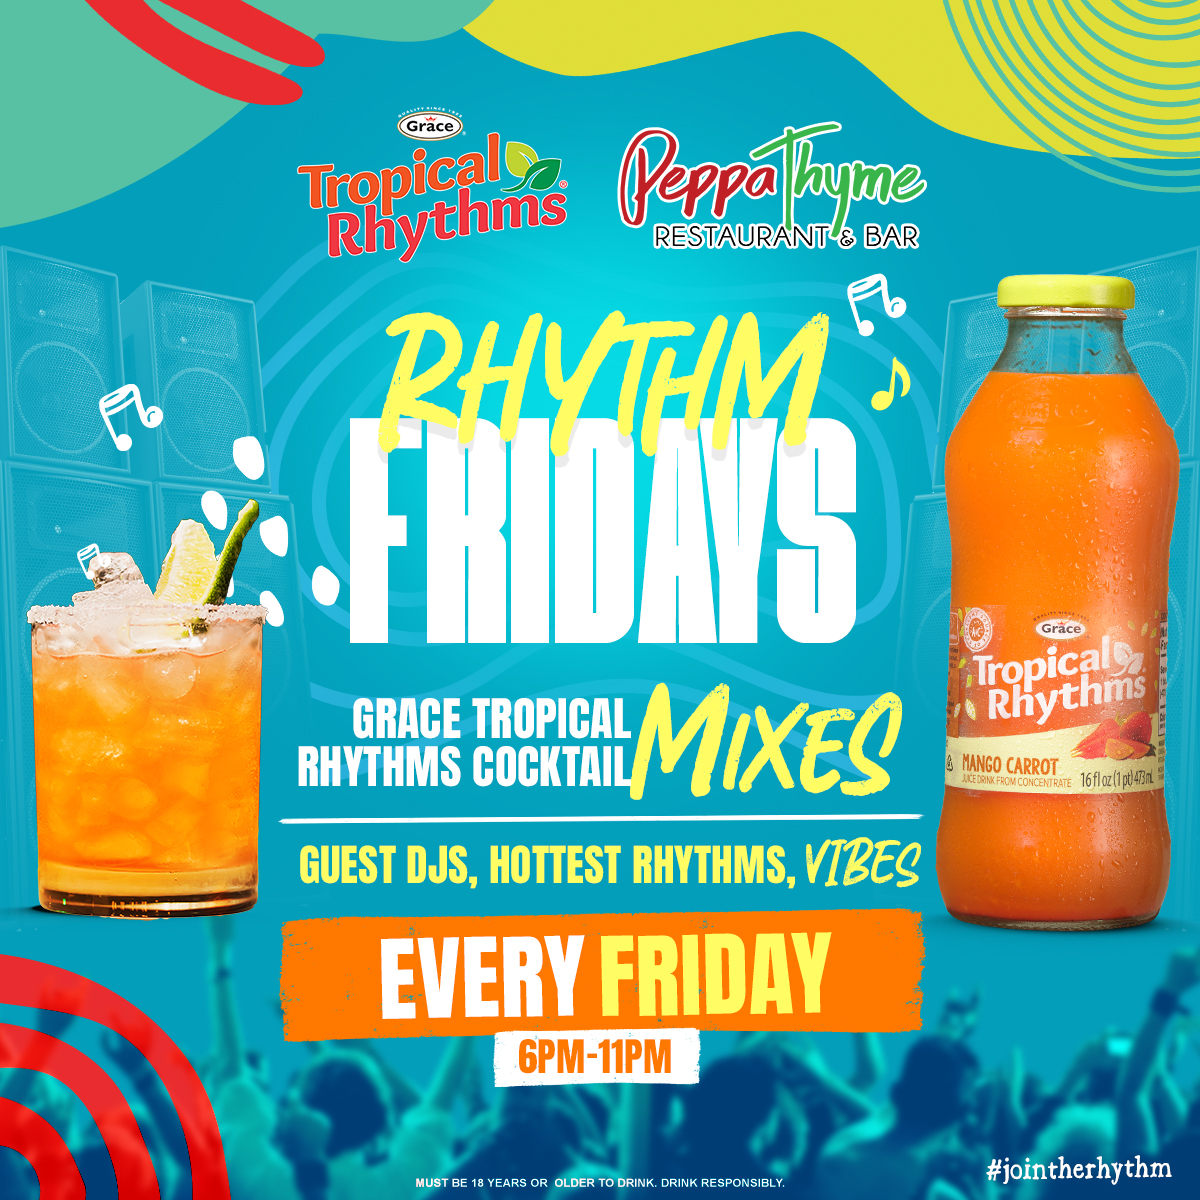 We're back!! #JoinTheRhythm this and every Friday with us at PeppaThyme! 😃 Drop some 🔥🔥🔥 if you'll be joining us!

#JoinTheRhythm #GraceTropicalRhythms #RhythmFridays